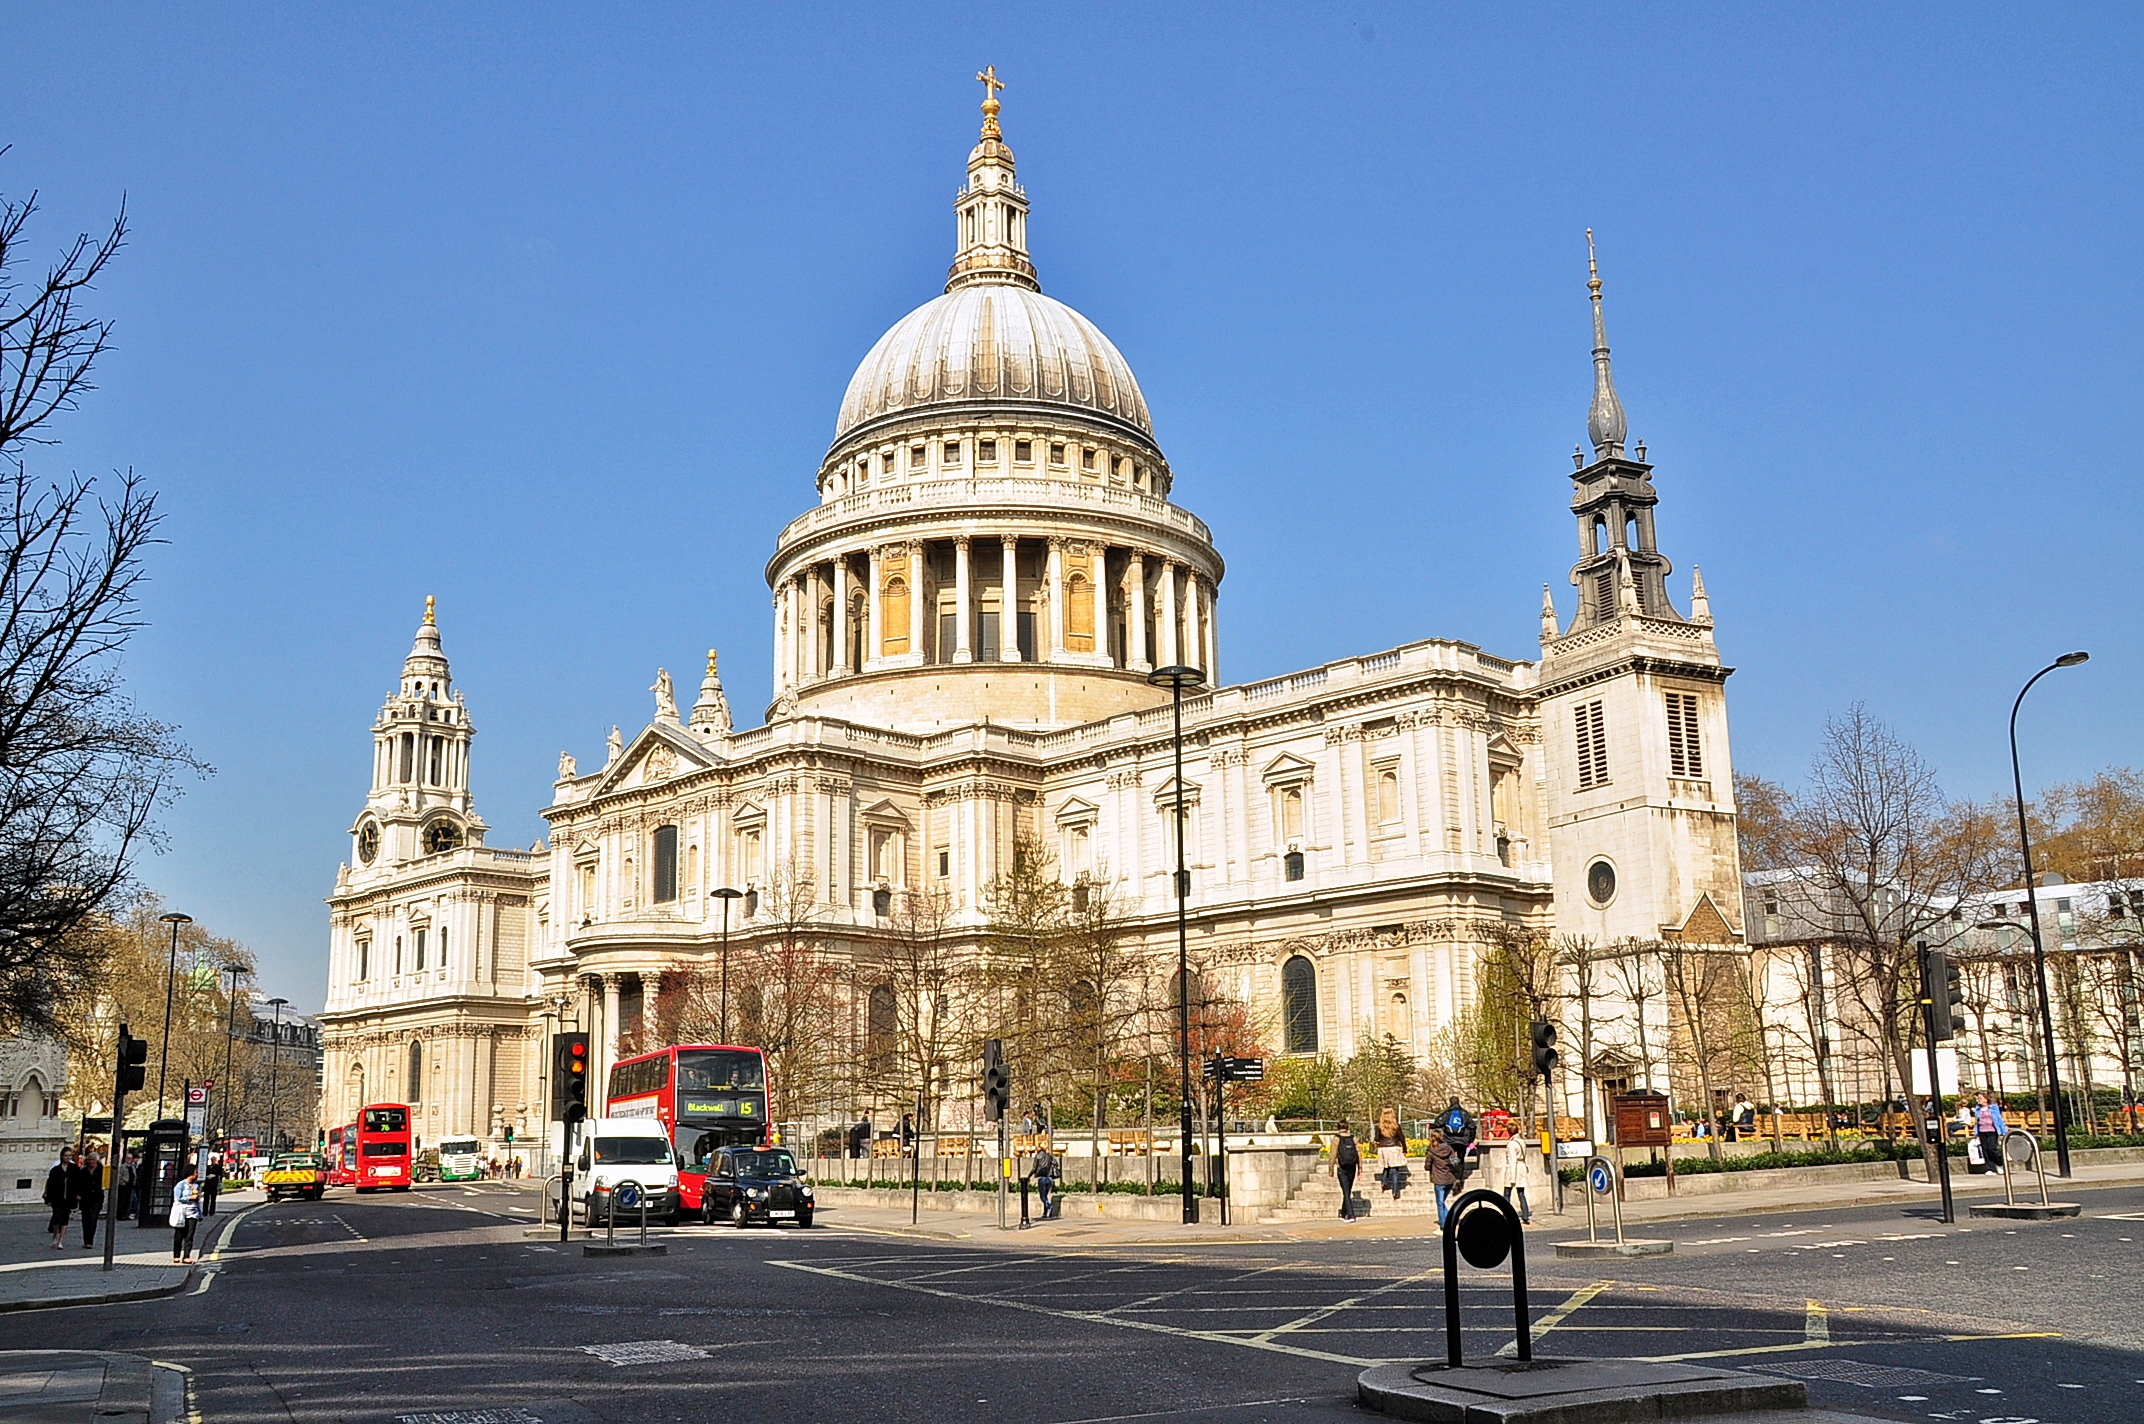 Saint Paul's Cathedral Widescreen